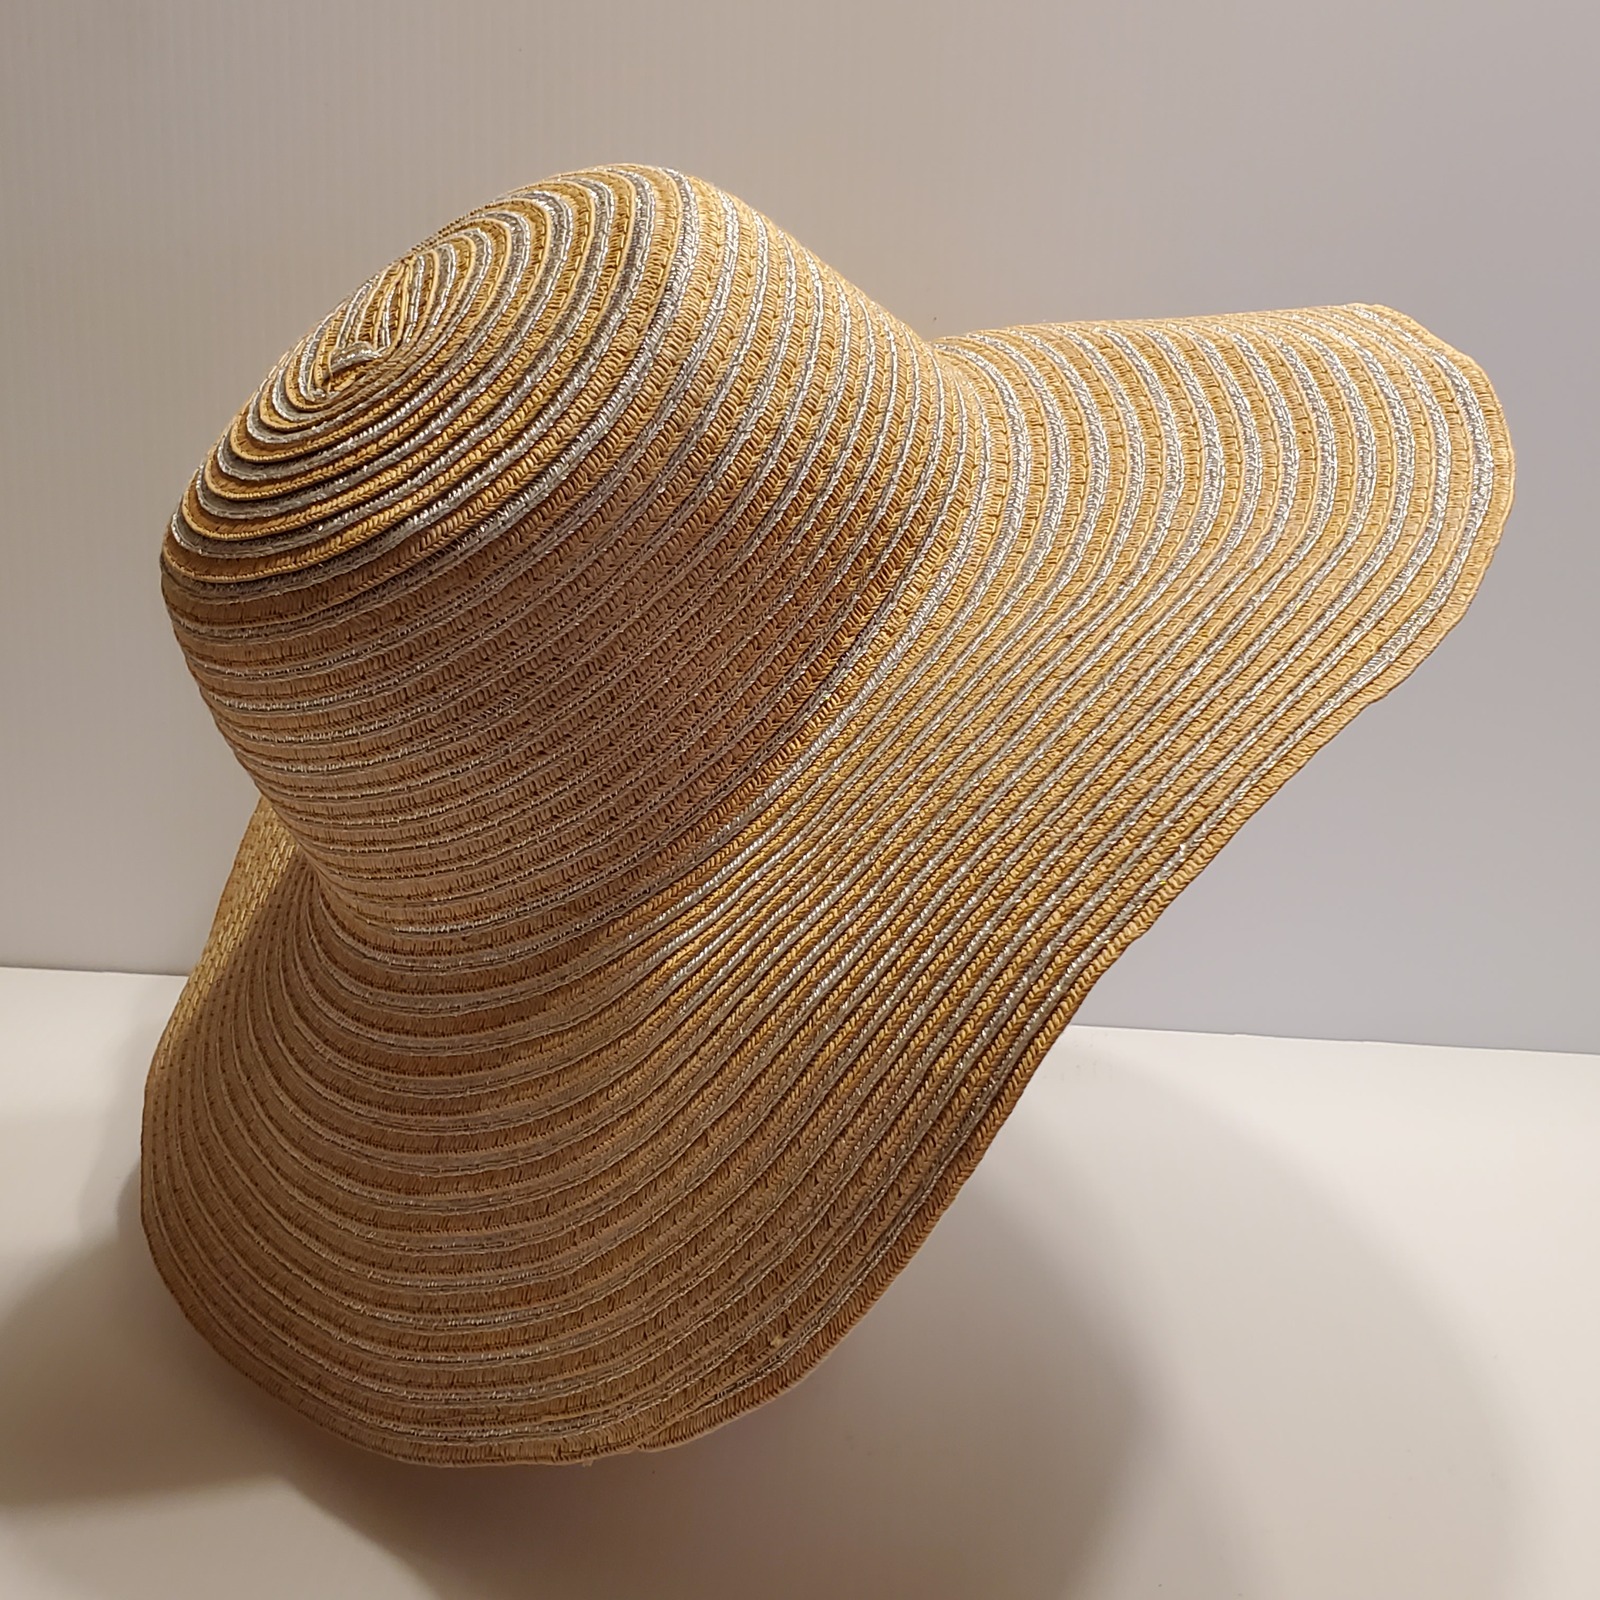 Primary image for Magid paper straw hat  Pre-owned, very good shape. Brim 4.5”